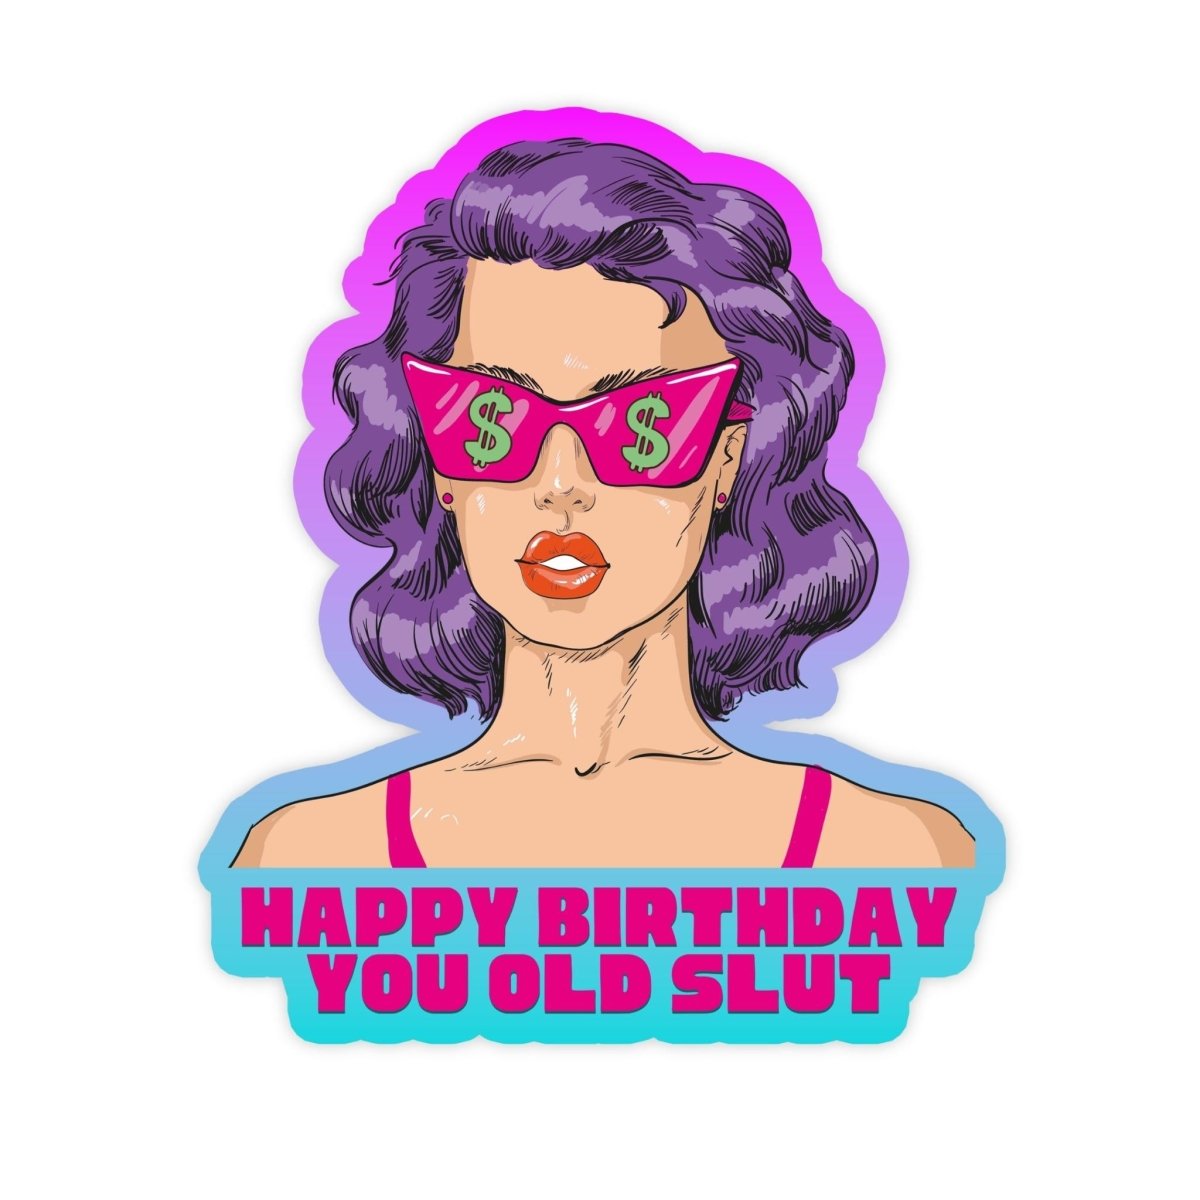 Happy Birthday You Old Slut Retro Vaporwave Sticker - stickerbullHappy Birthday You Old Slut Retro Vaporwave StickerRetail StickerstickerbullstickerbullTaylor_OldSlut [#227]Vaporwave Retro illustration of a women wearing money sunglasses and a purple and blue gradient border the text reads "happy birthday you old slut" this is a birthday sticker